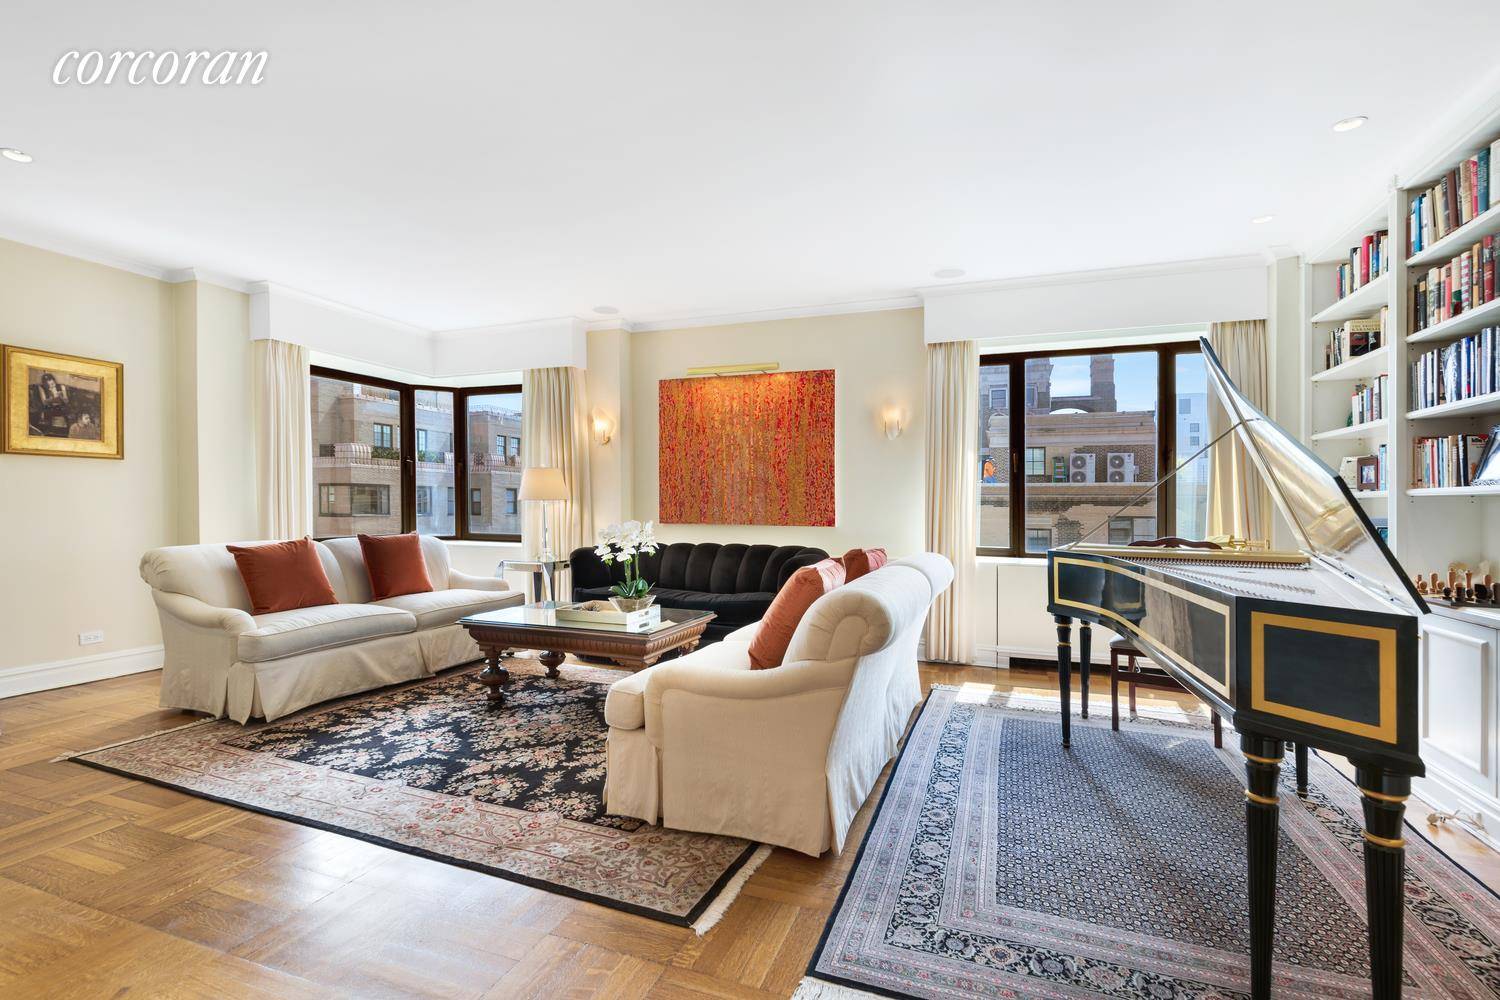 Two private terraces one a large wrap terrace and three exposures are featured in this sun filled, corner penthouse duplex high atop the 'Gold Coast' of Manhattan's Upper East Side ...